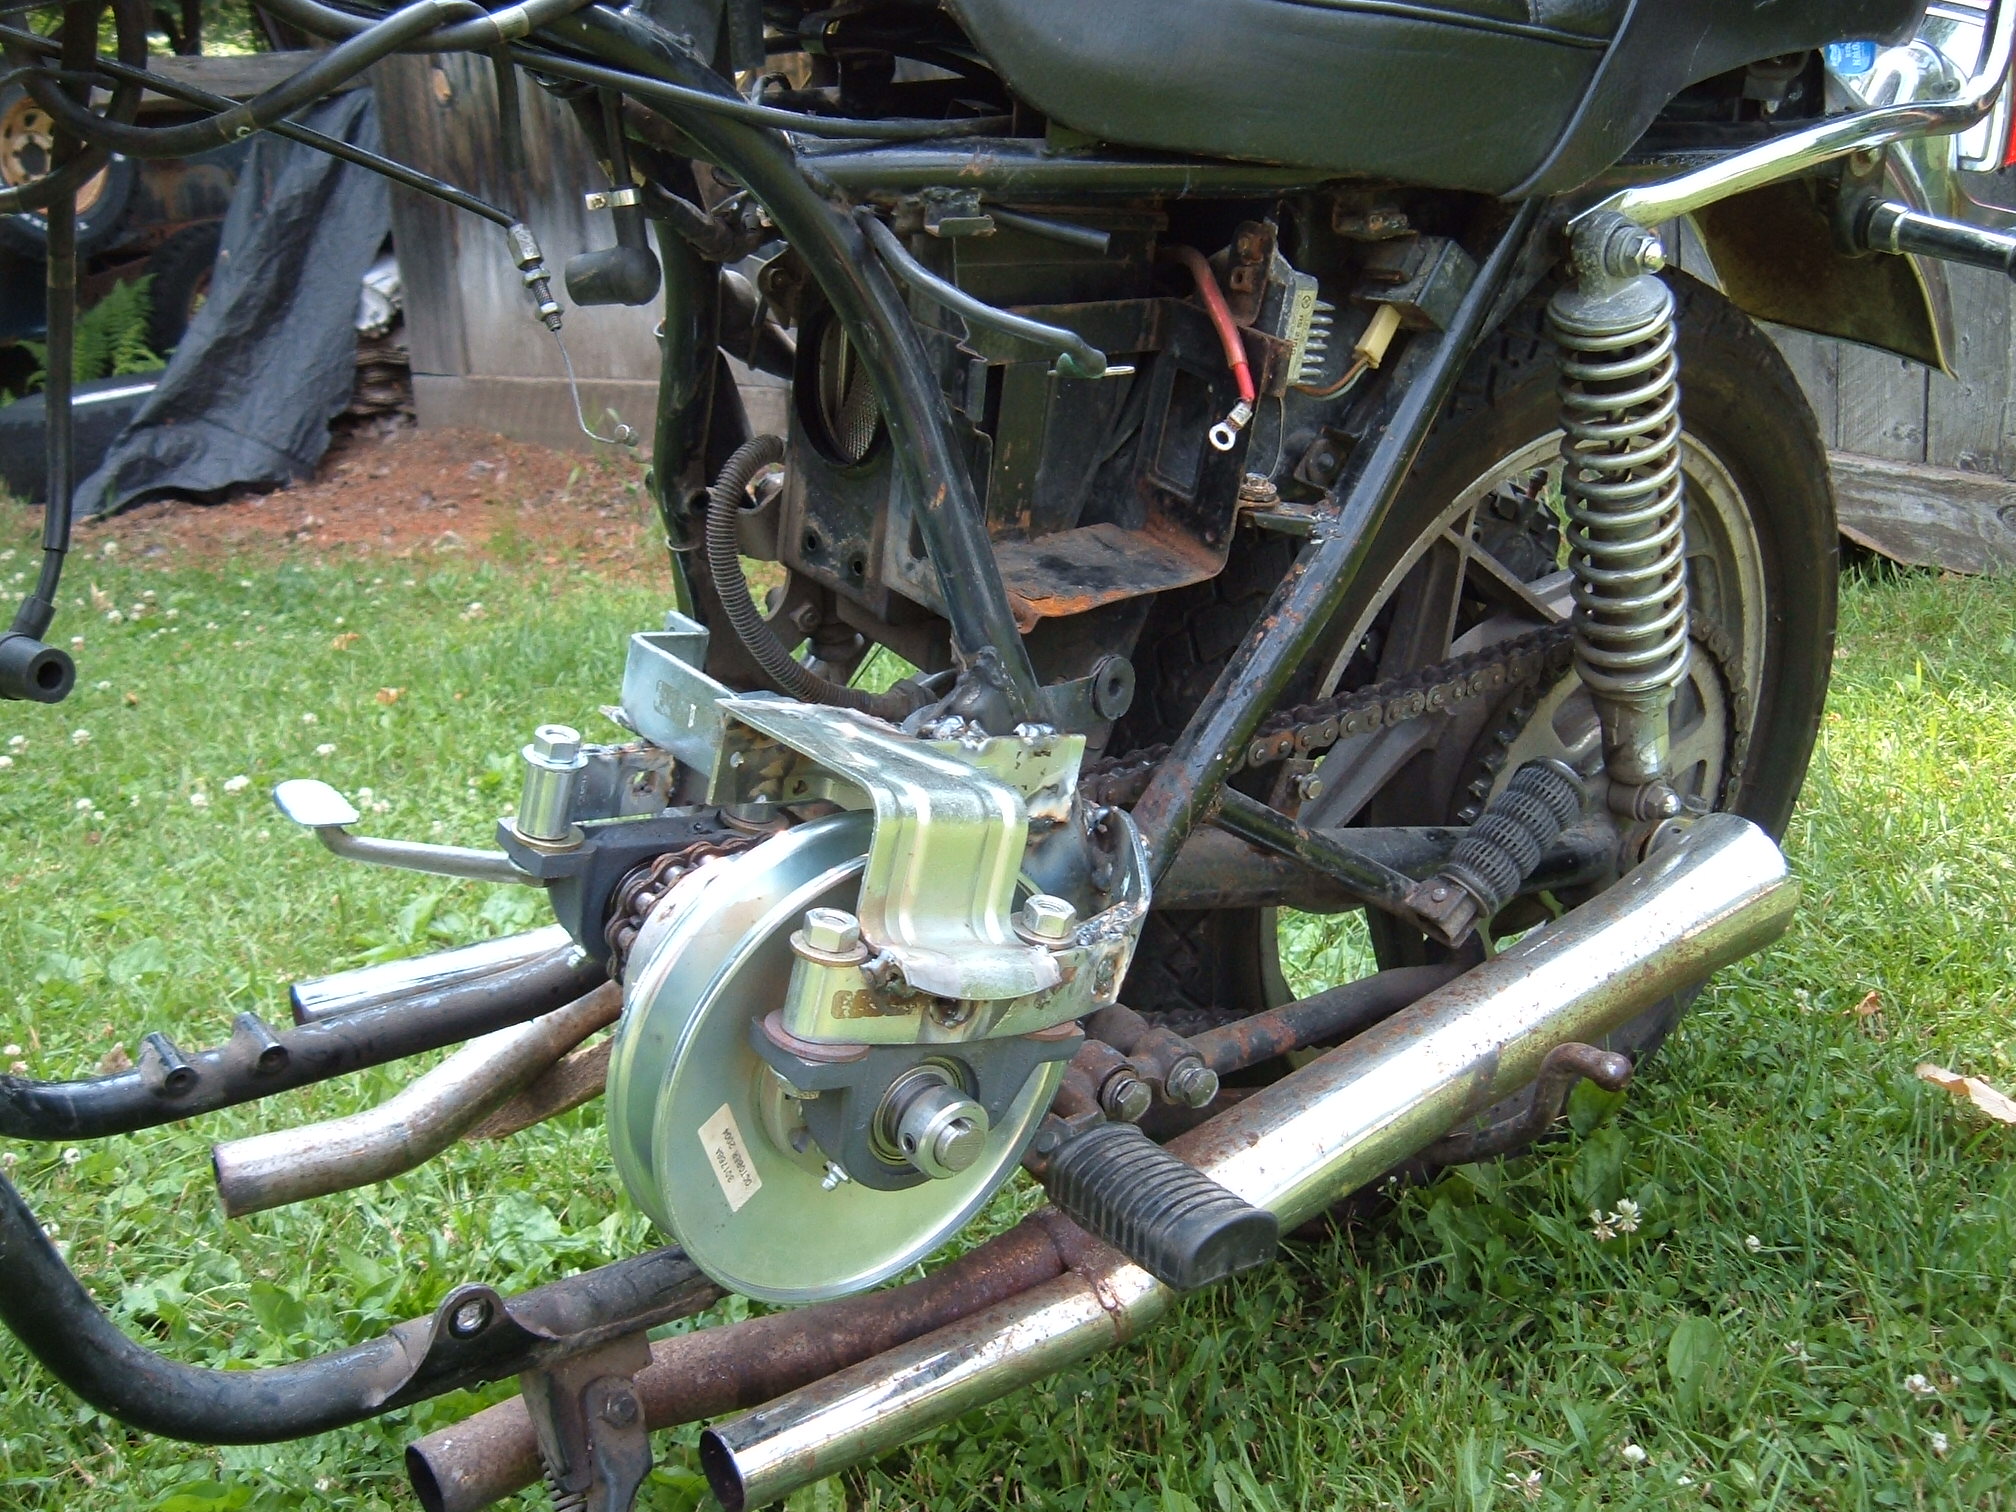 CVT installed on the motorcycle frame